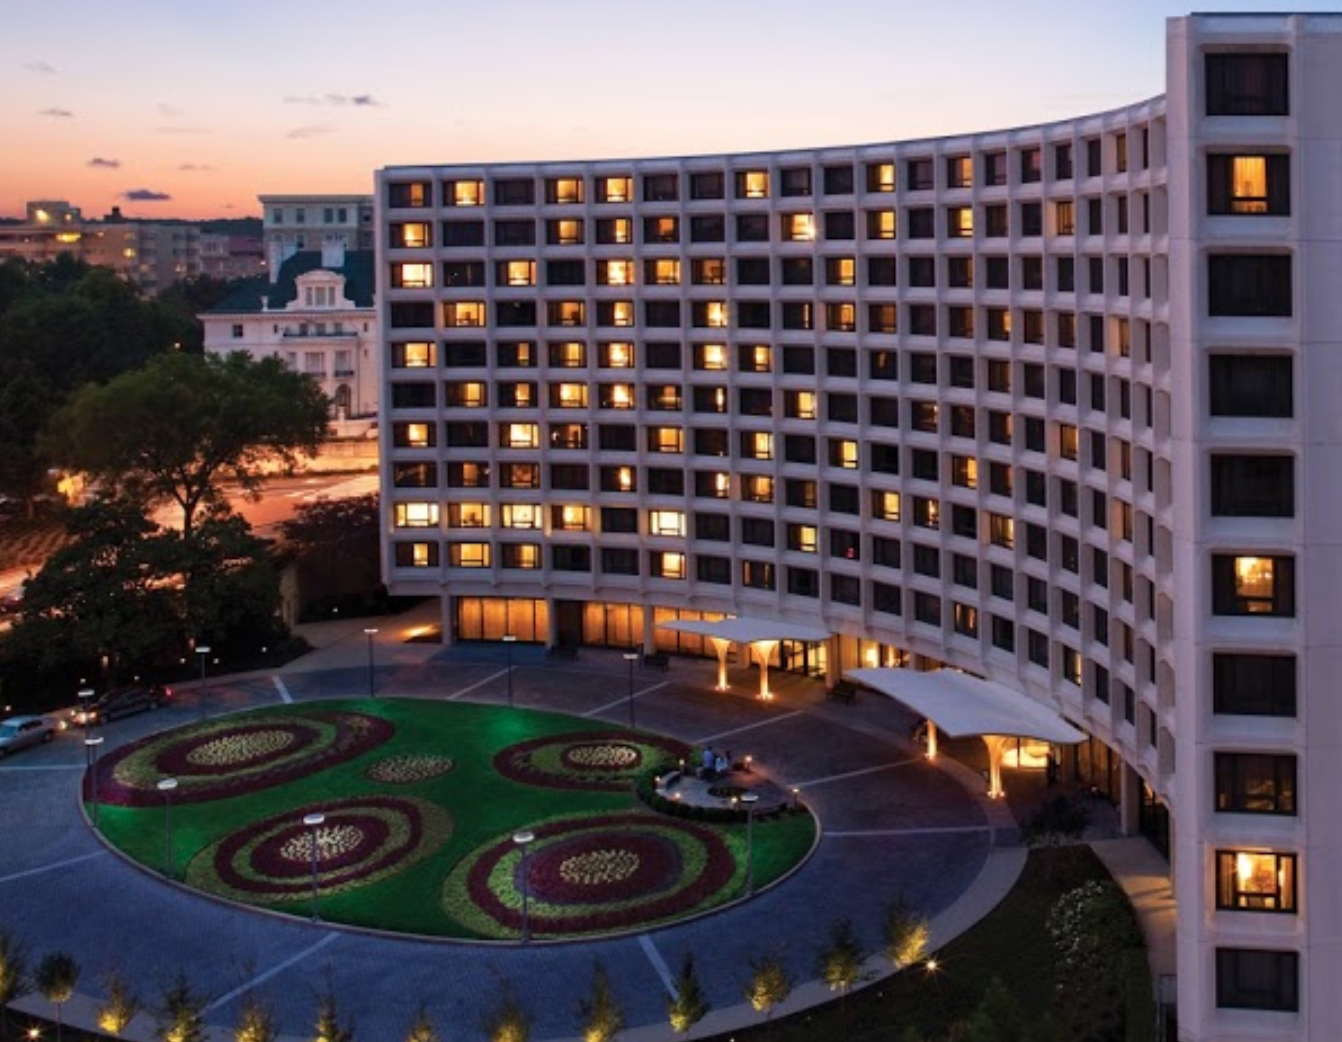 10 Best Washington, D.C. Hotels to Book With Points [Max Value]